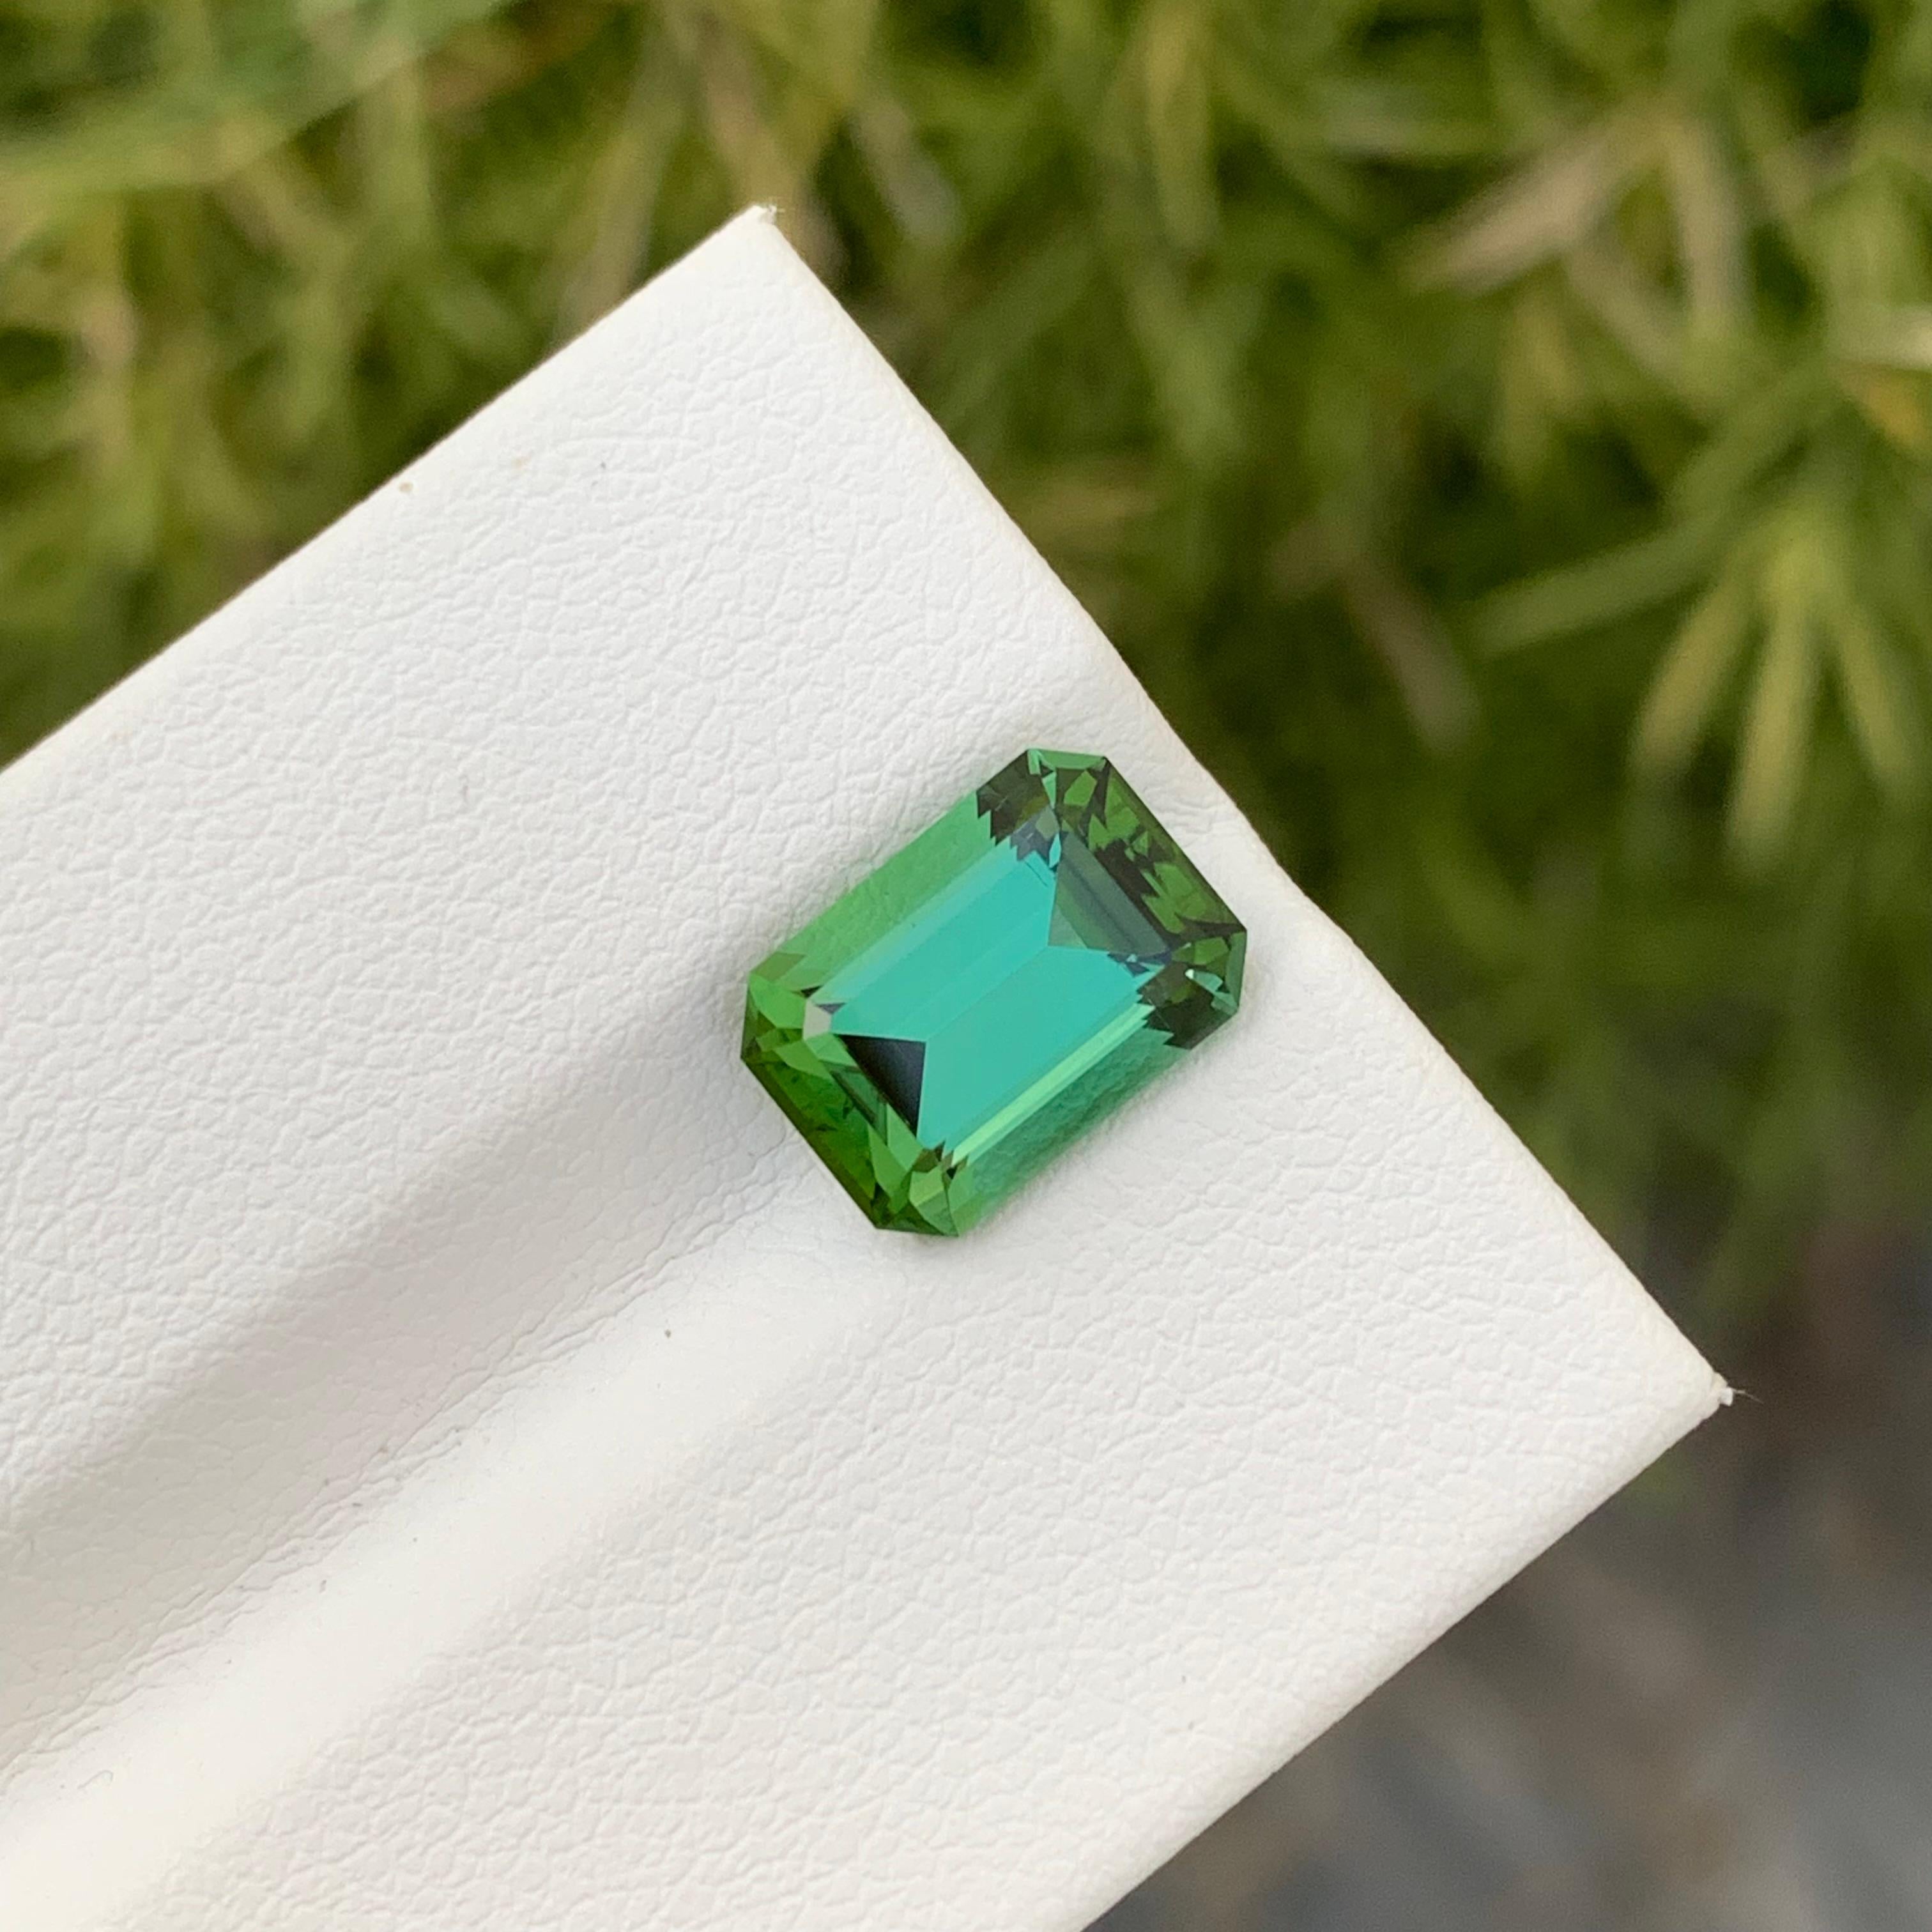 Loose Mint Green Tourmaline

Weight: 3.40 Carats
Dimension: 10.3 x 7.3 x 5.6 Mm
Colour: Mint Green
Origin: Afghanistan
Certificate: On Demand
Treatment: Non

Tourmaline is a captivating gemstone known for its remarkable variety of colors, making it